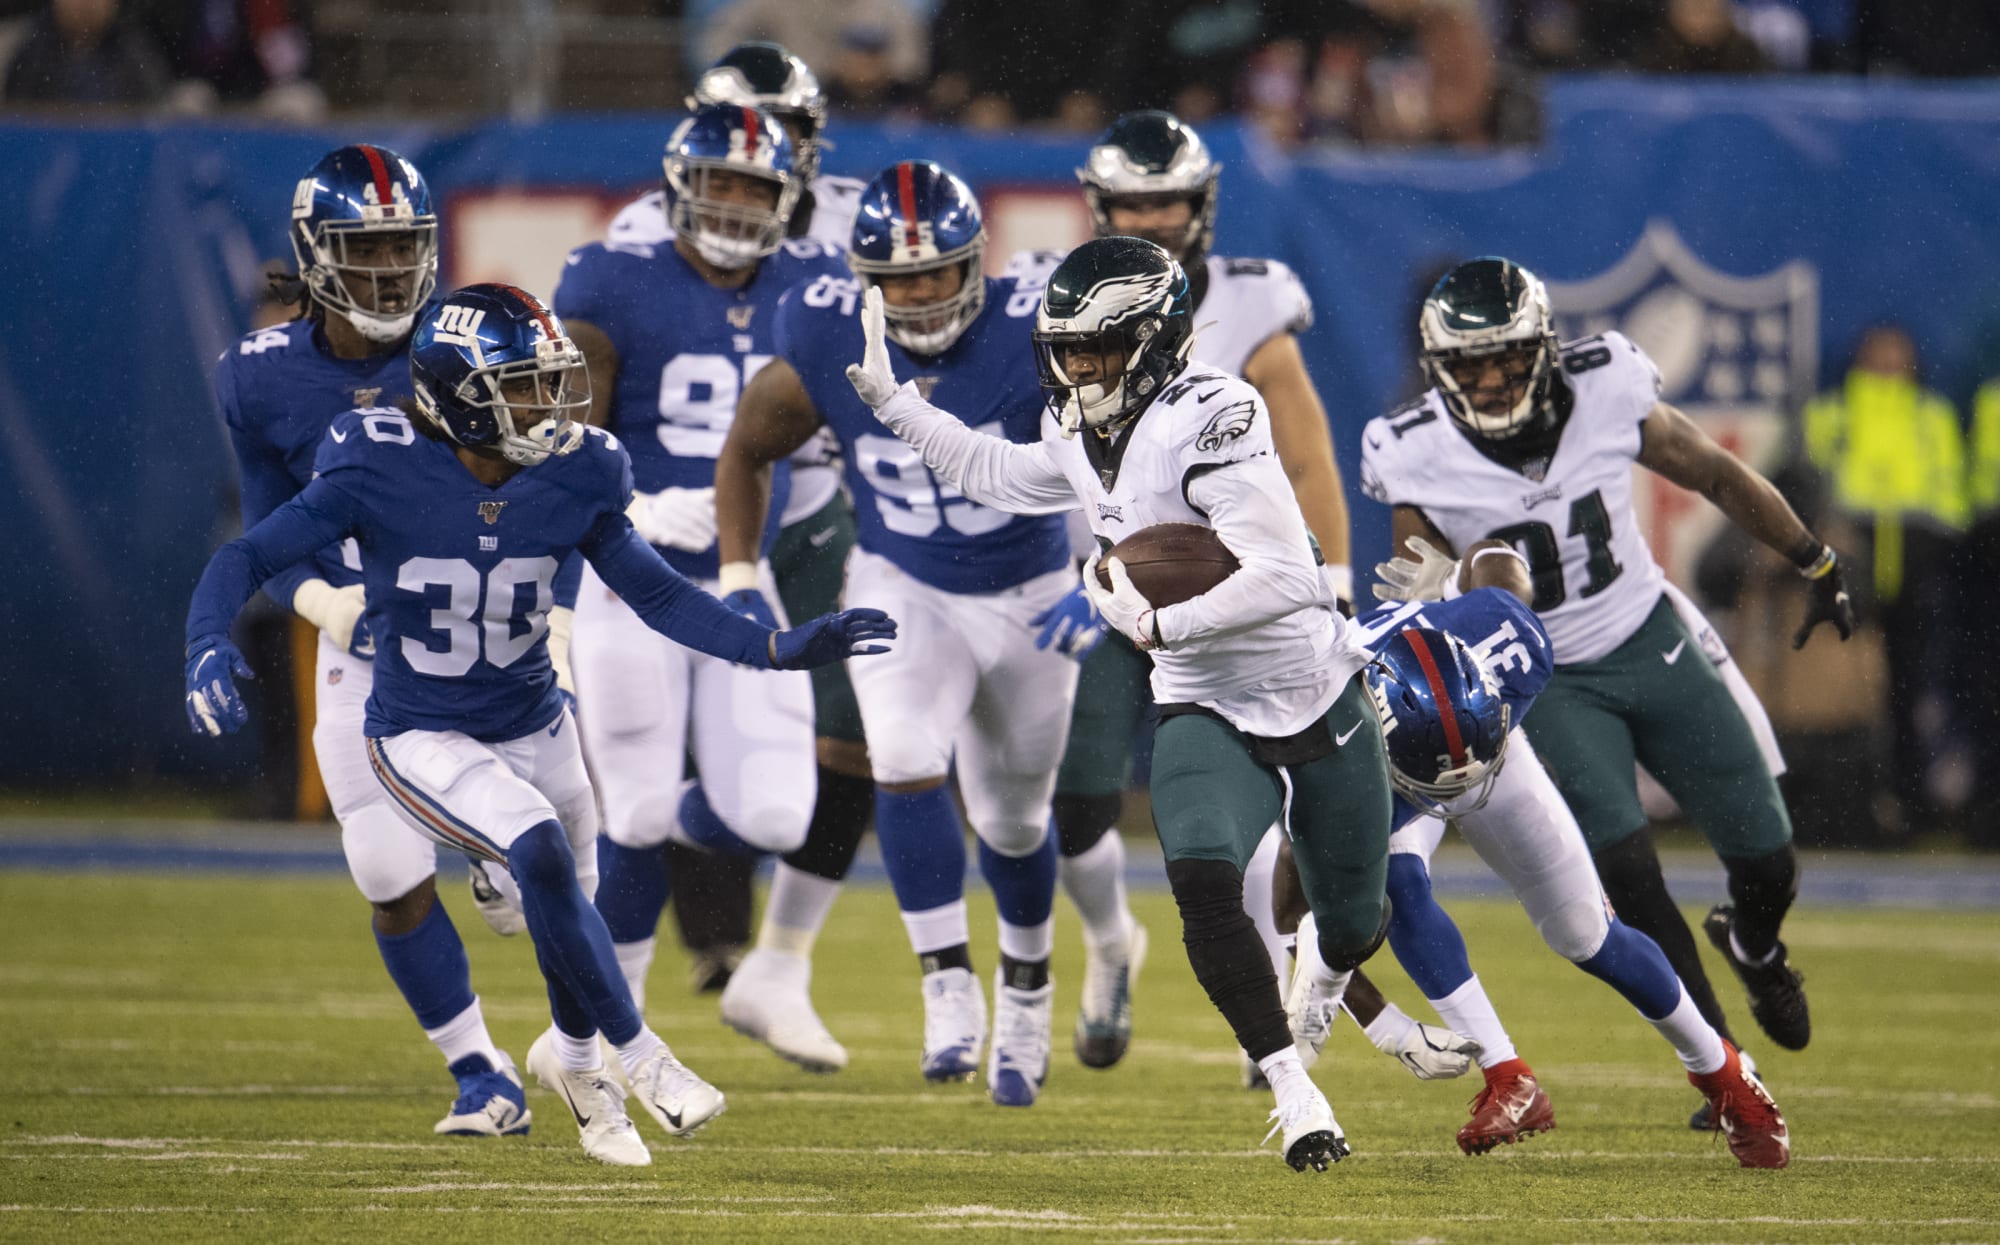 Giants vs. Eagles Rivalry among the fiercest in the NFL